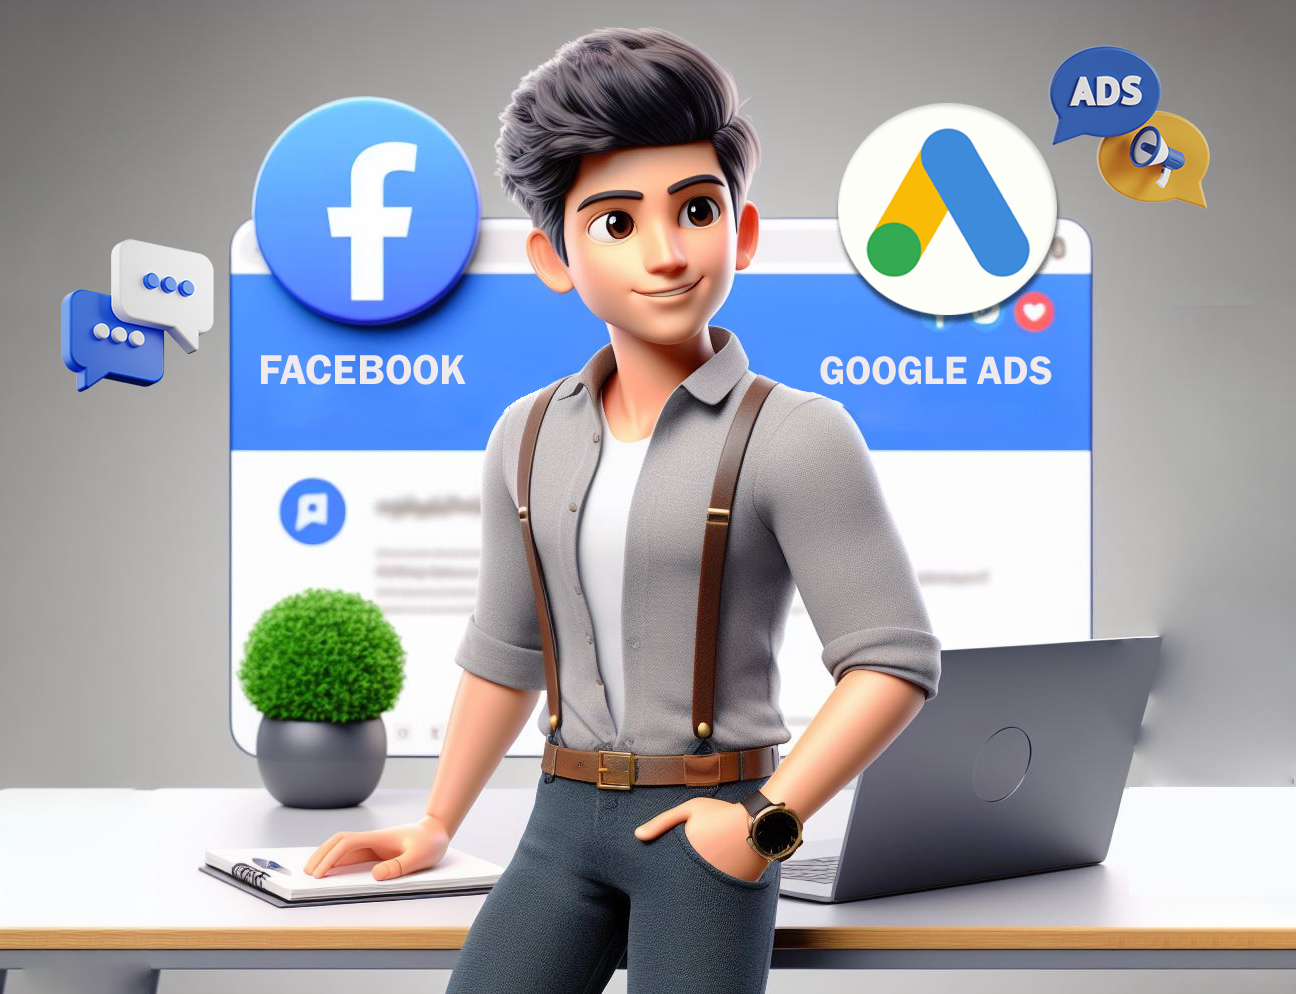 Facebook and google ads